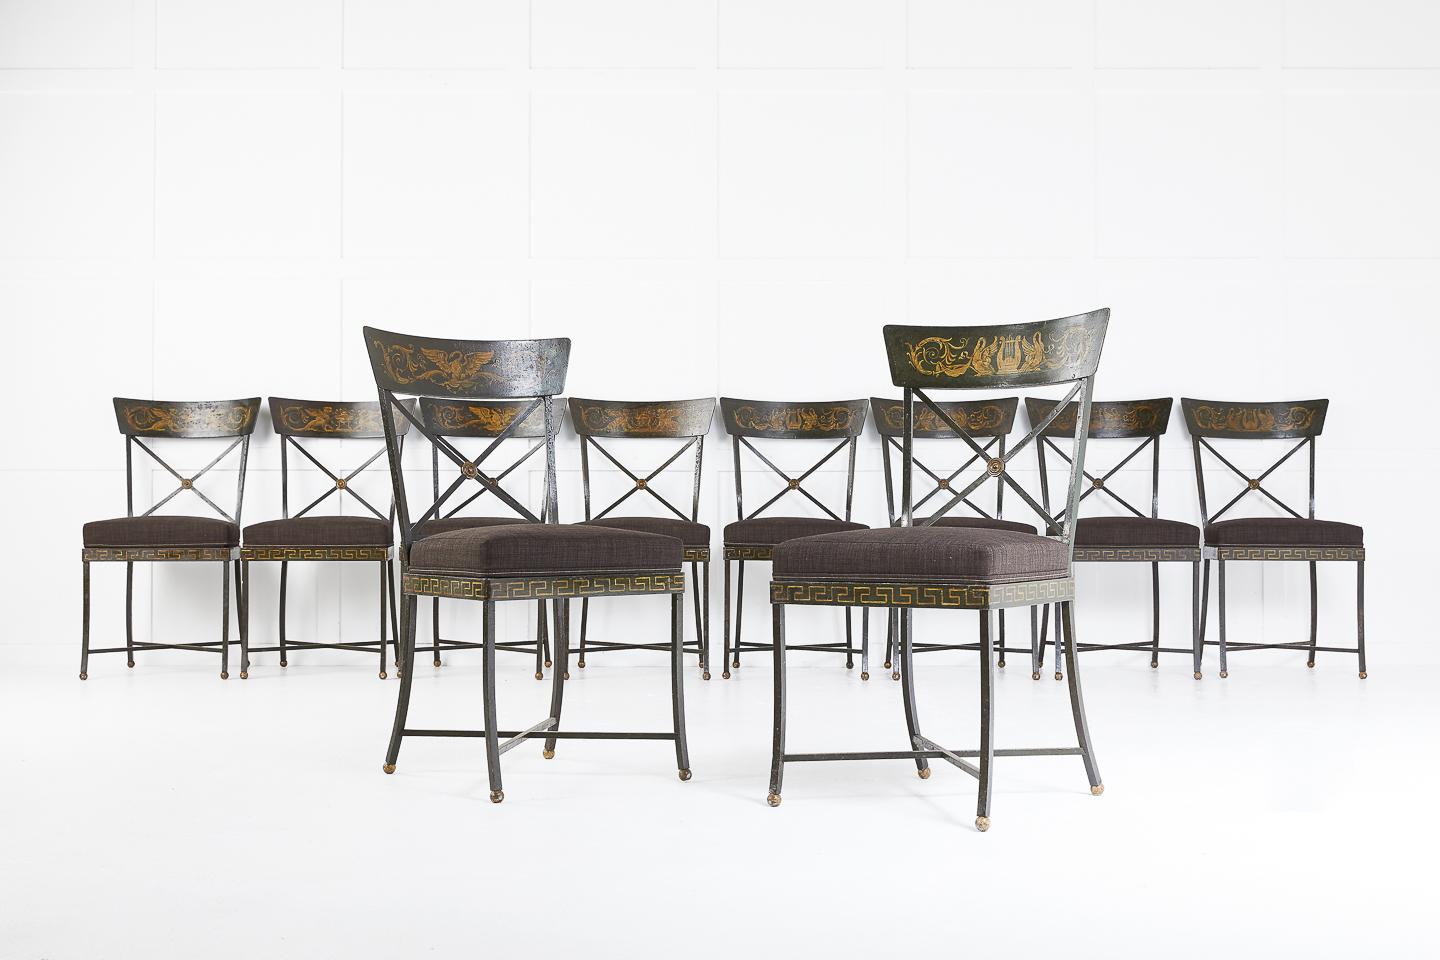 Beautiful rare set of ten chairs with original paint.
Handmade in solid steel, braised and riveted, exceptional quality and heavyweight.

With interesting Scottish aristocratic provenance for the buyer.